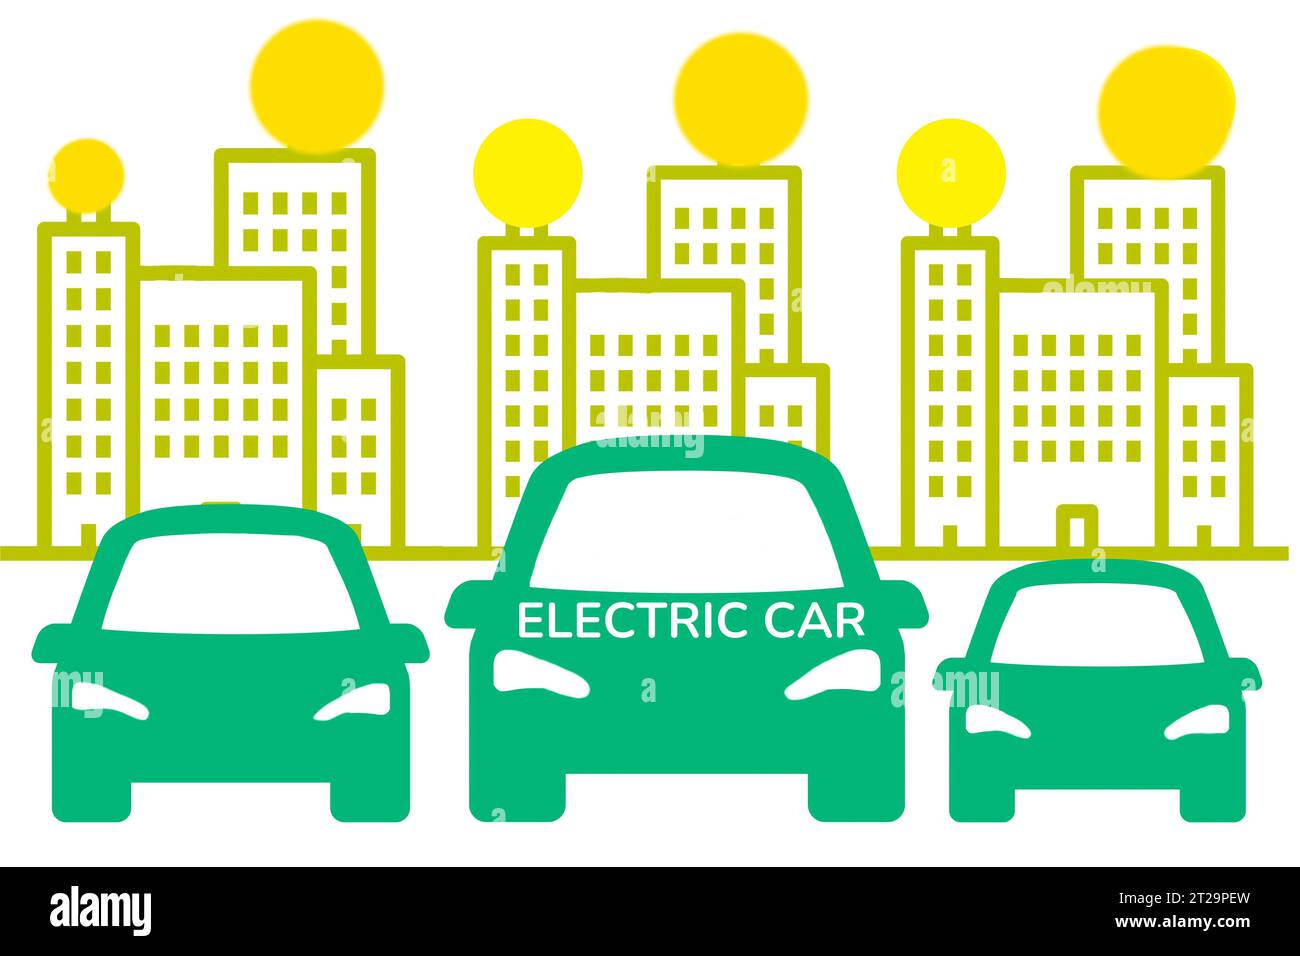 Electric Car Illustrations Stock Photo